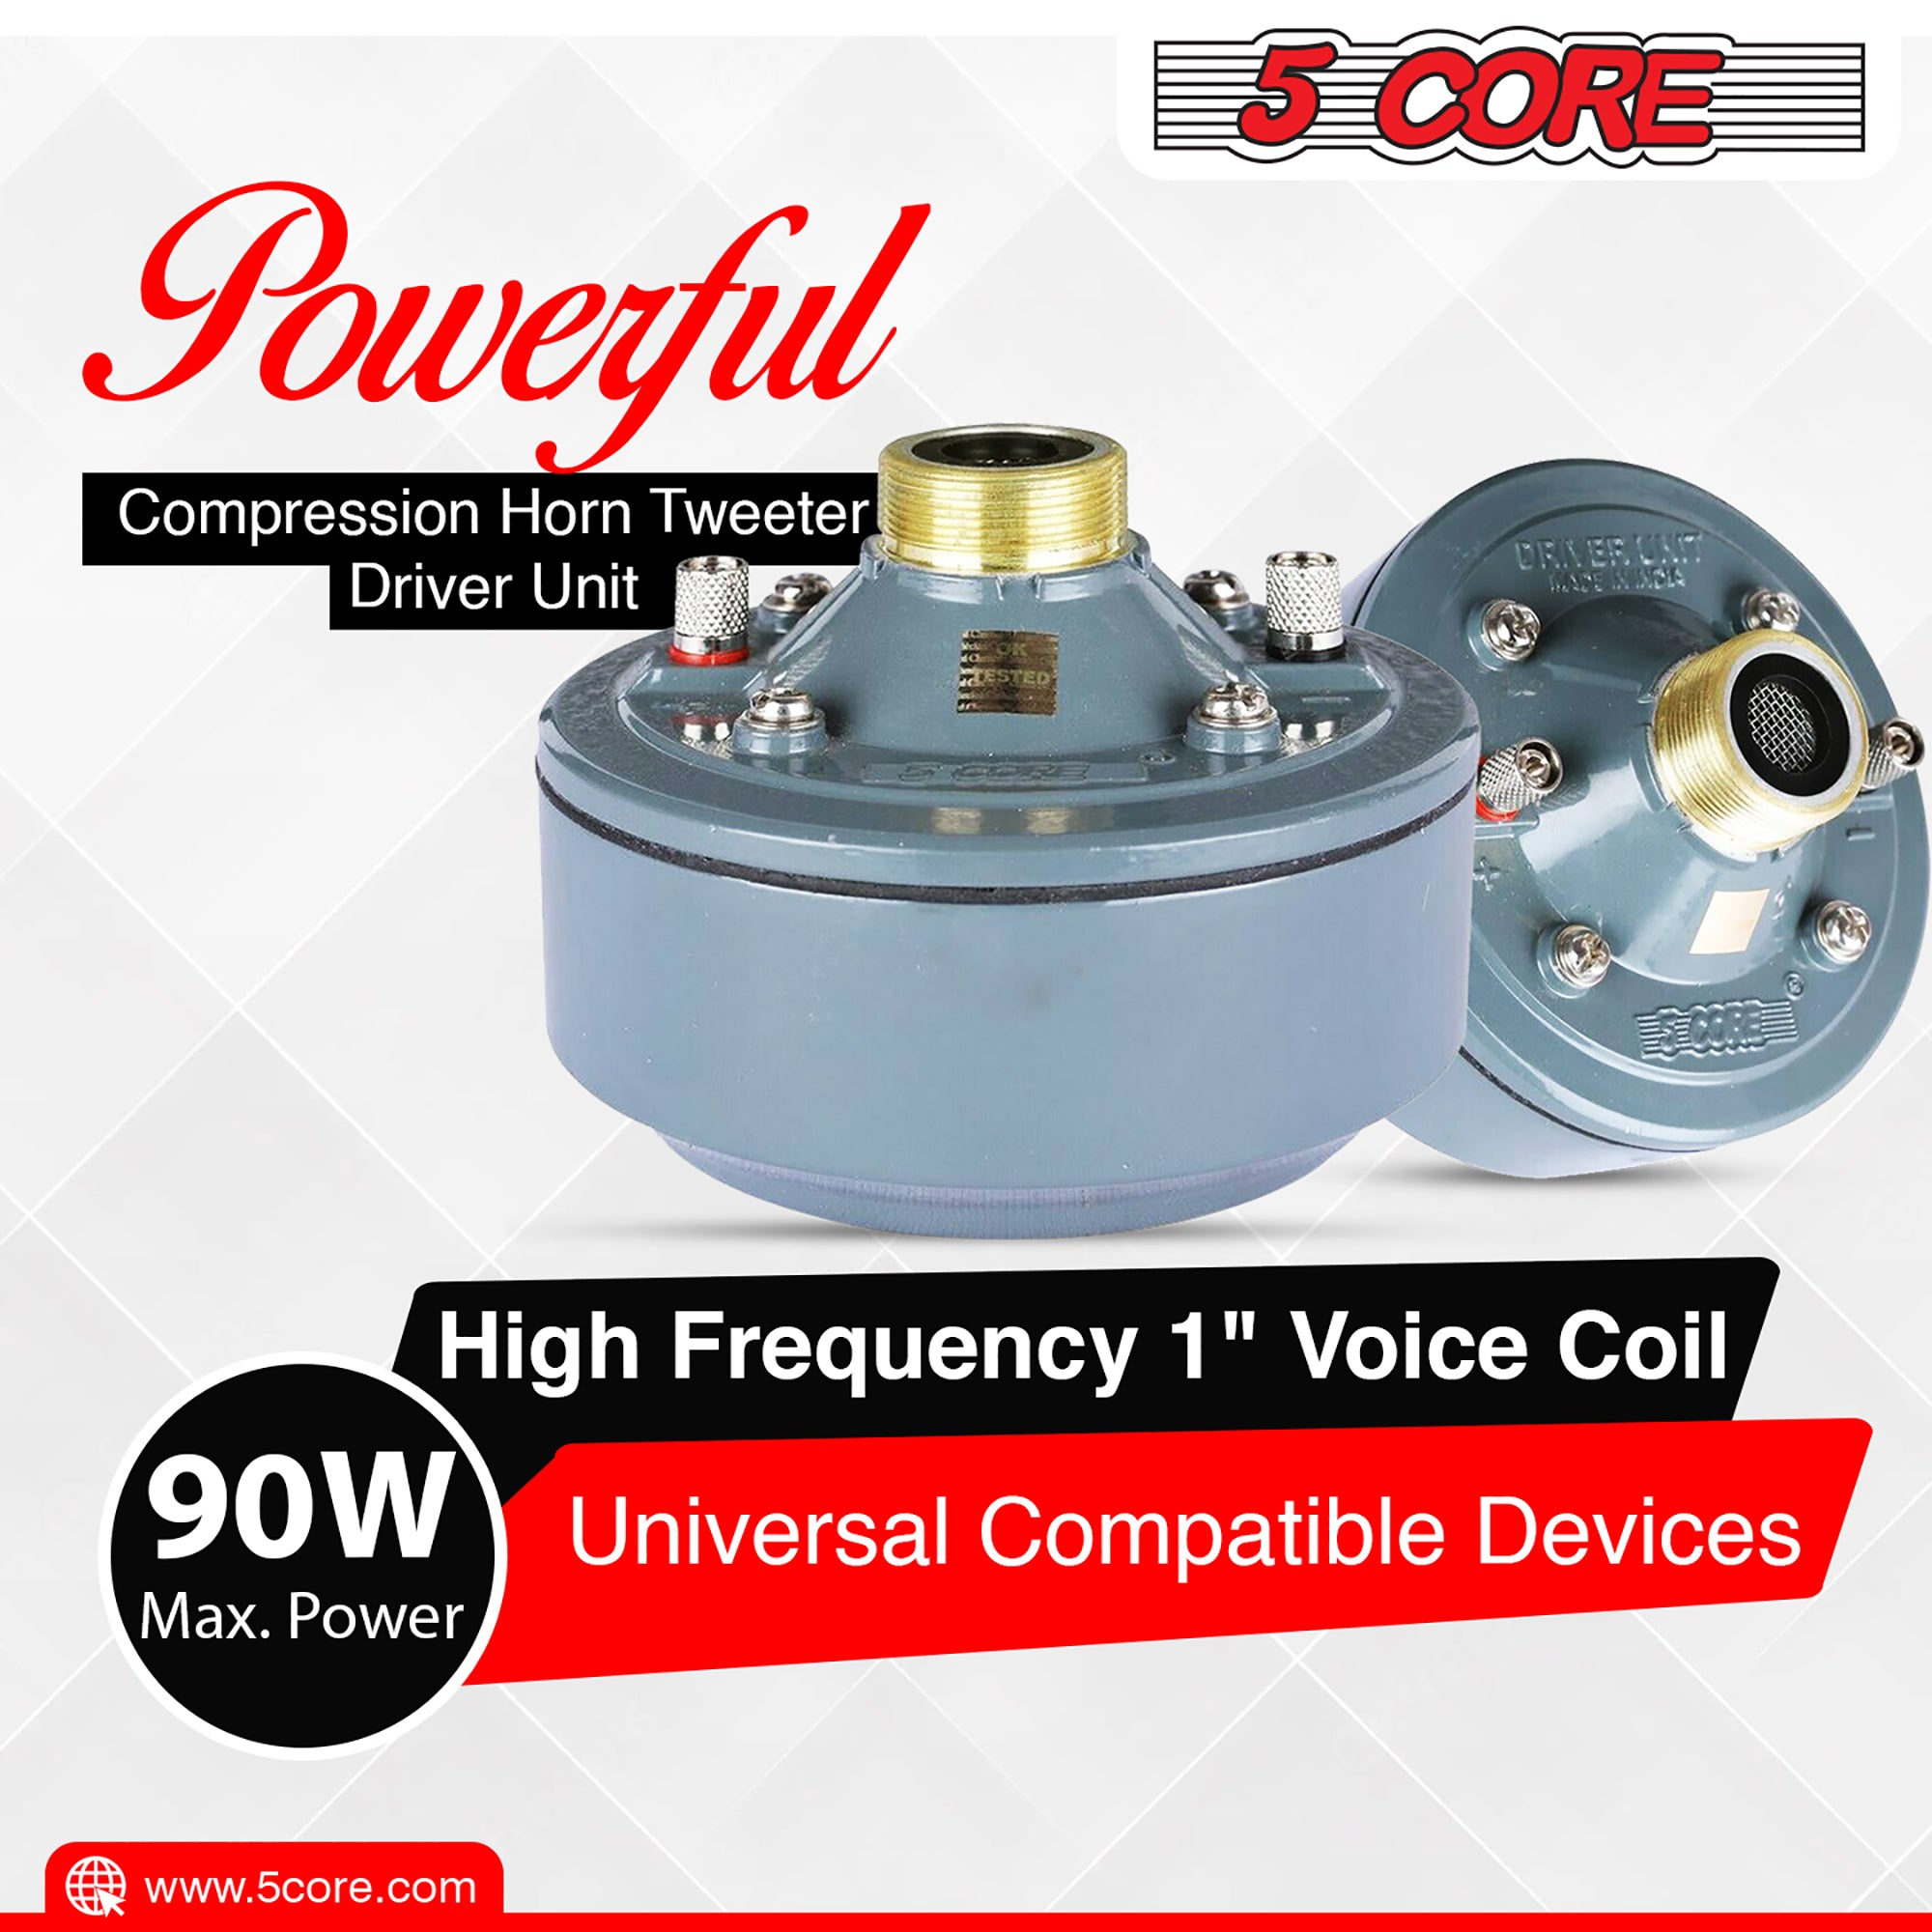 powerful compression horn tweeter driver unit